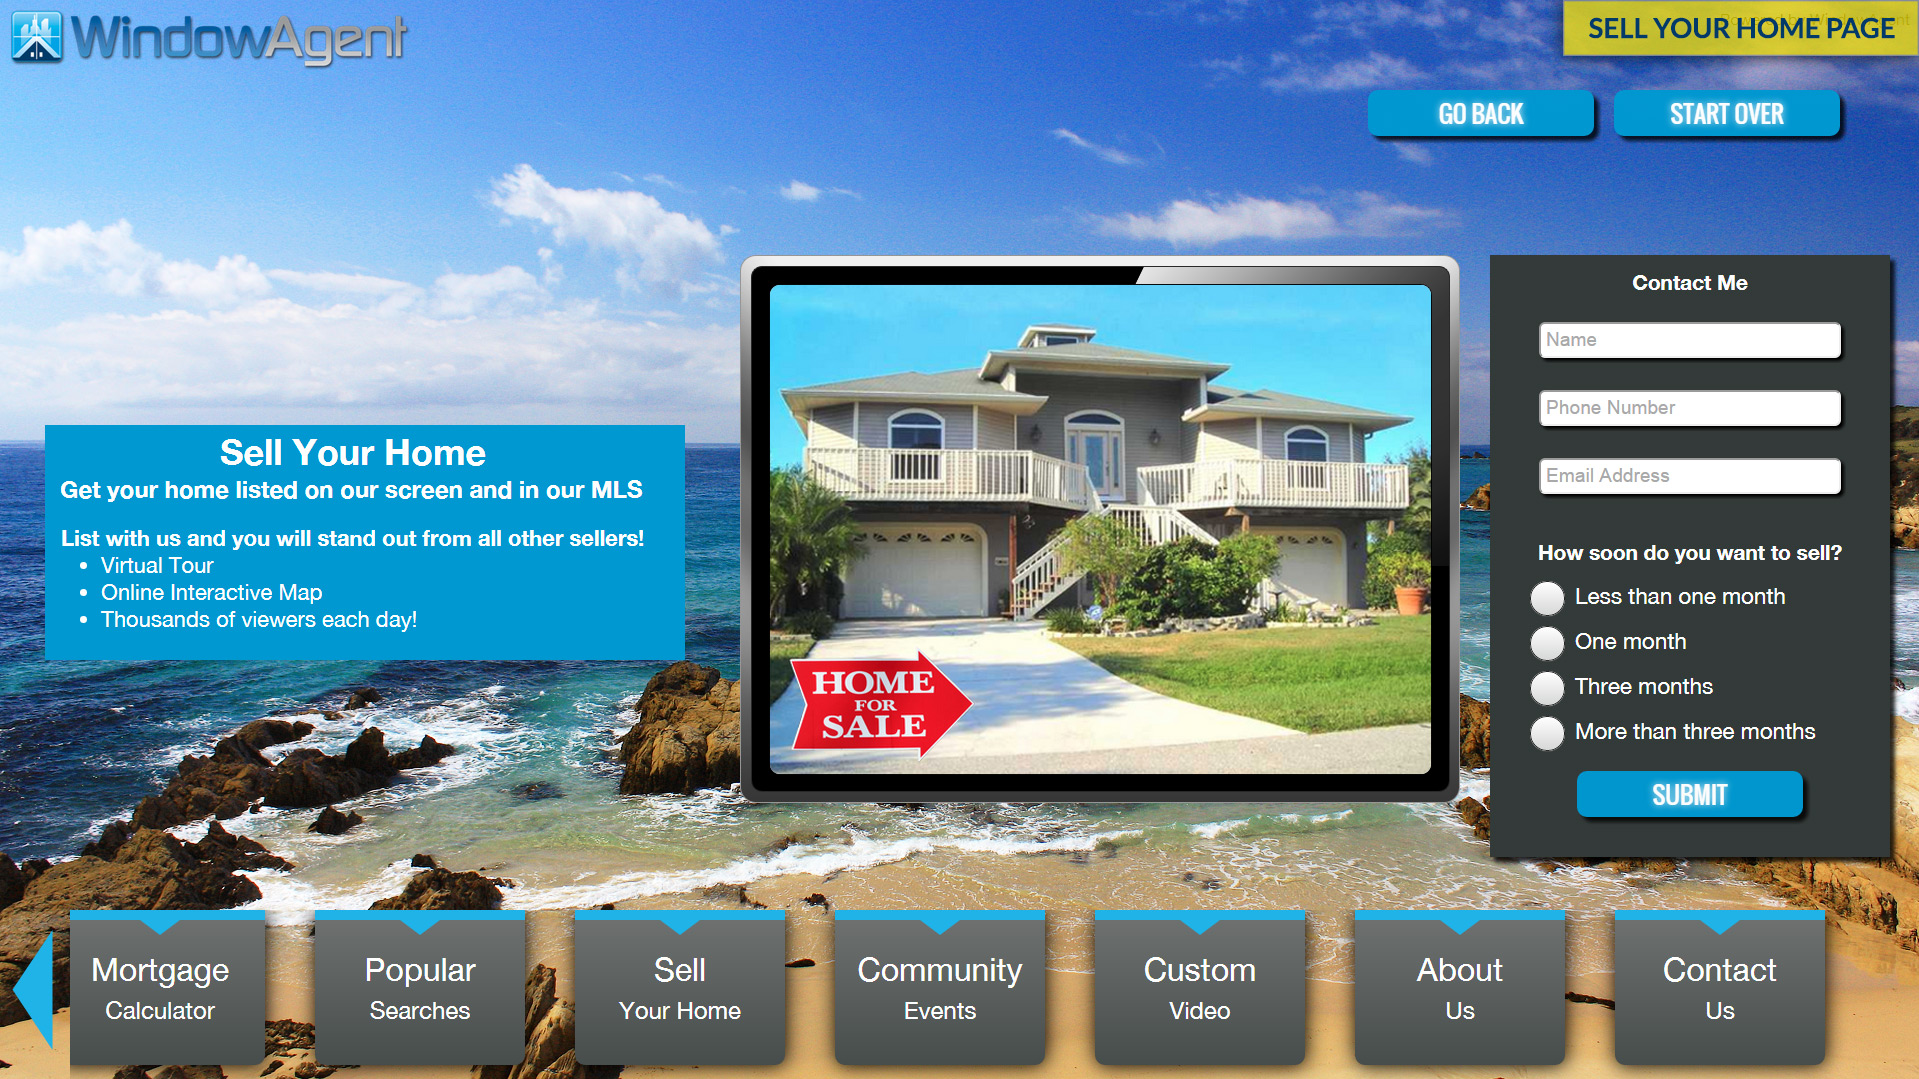 Real Estate marketing software app design windowagent sell-your-home page